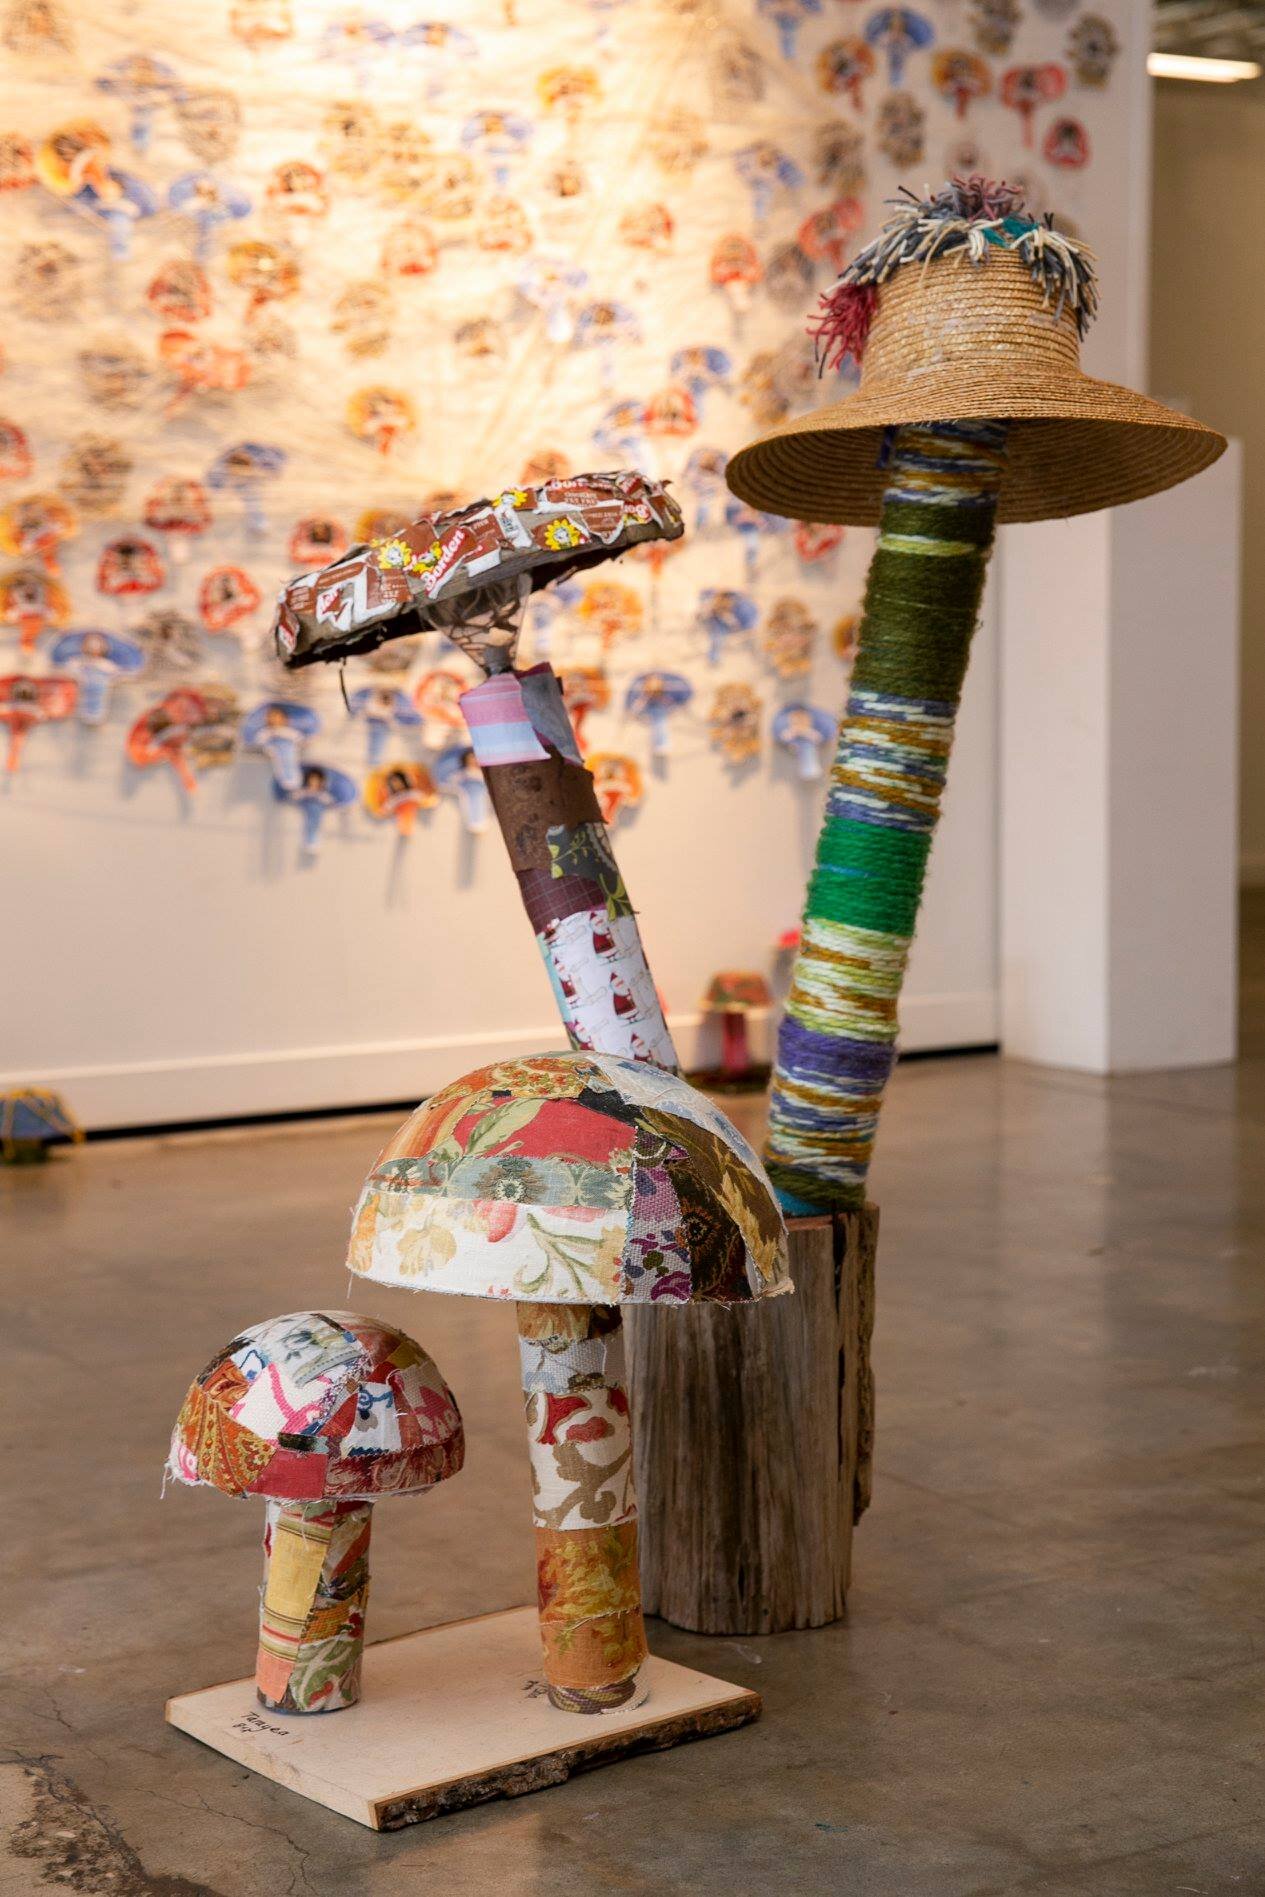  Mushroom sculptures created by local students. Photograph by Karson Photography 